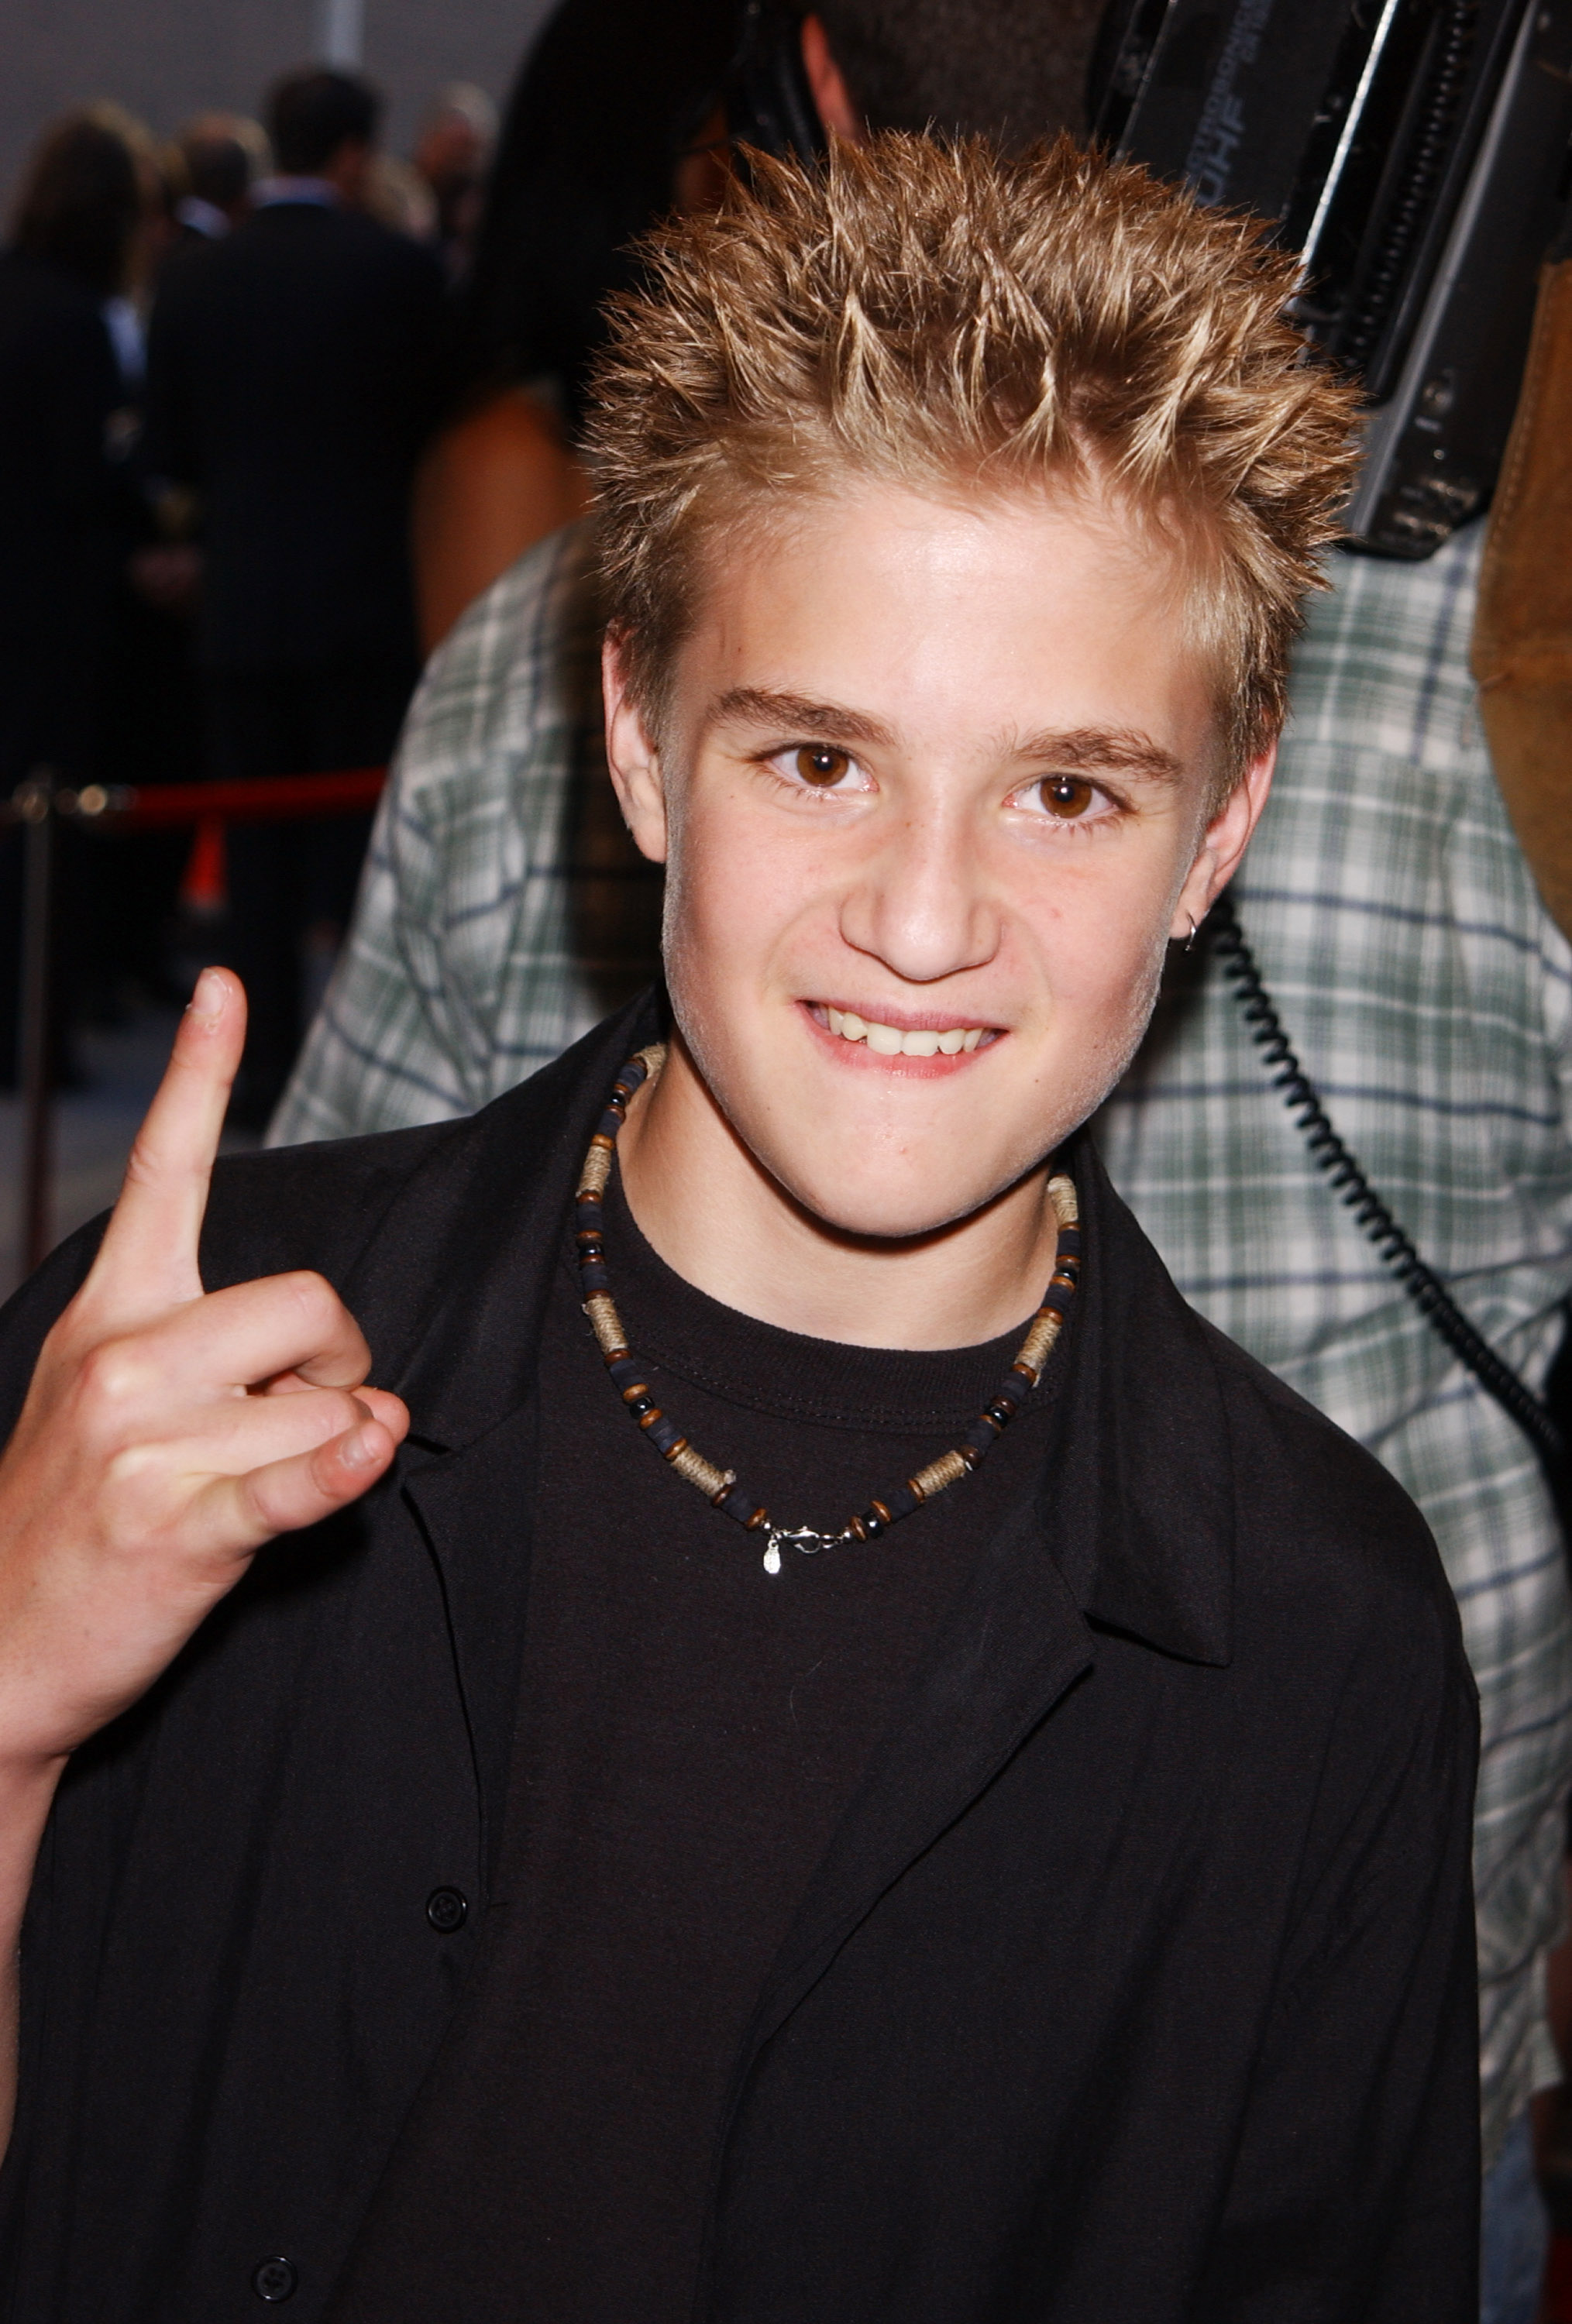 Kevin Clark during "The School of Rock" premiere in September 9, 2003 | Source: Getty Images